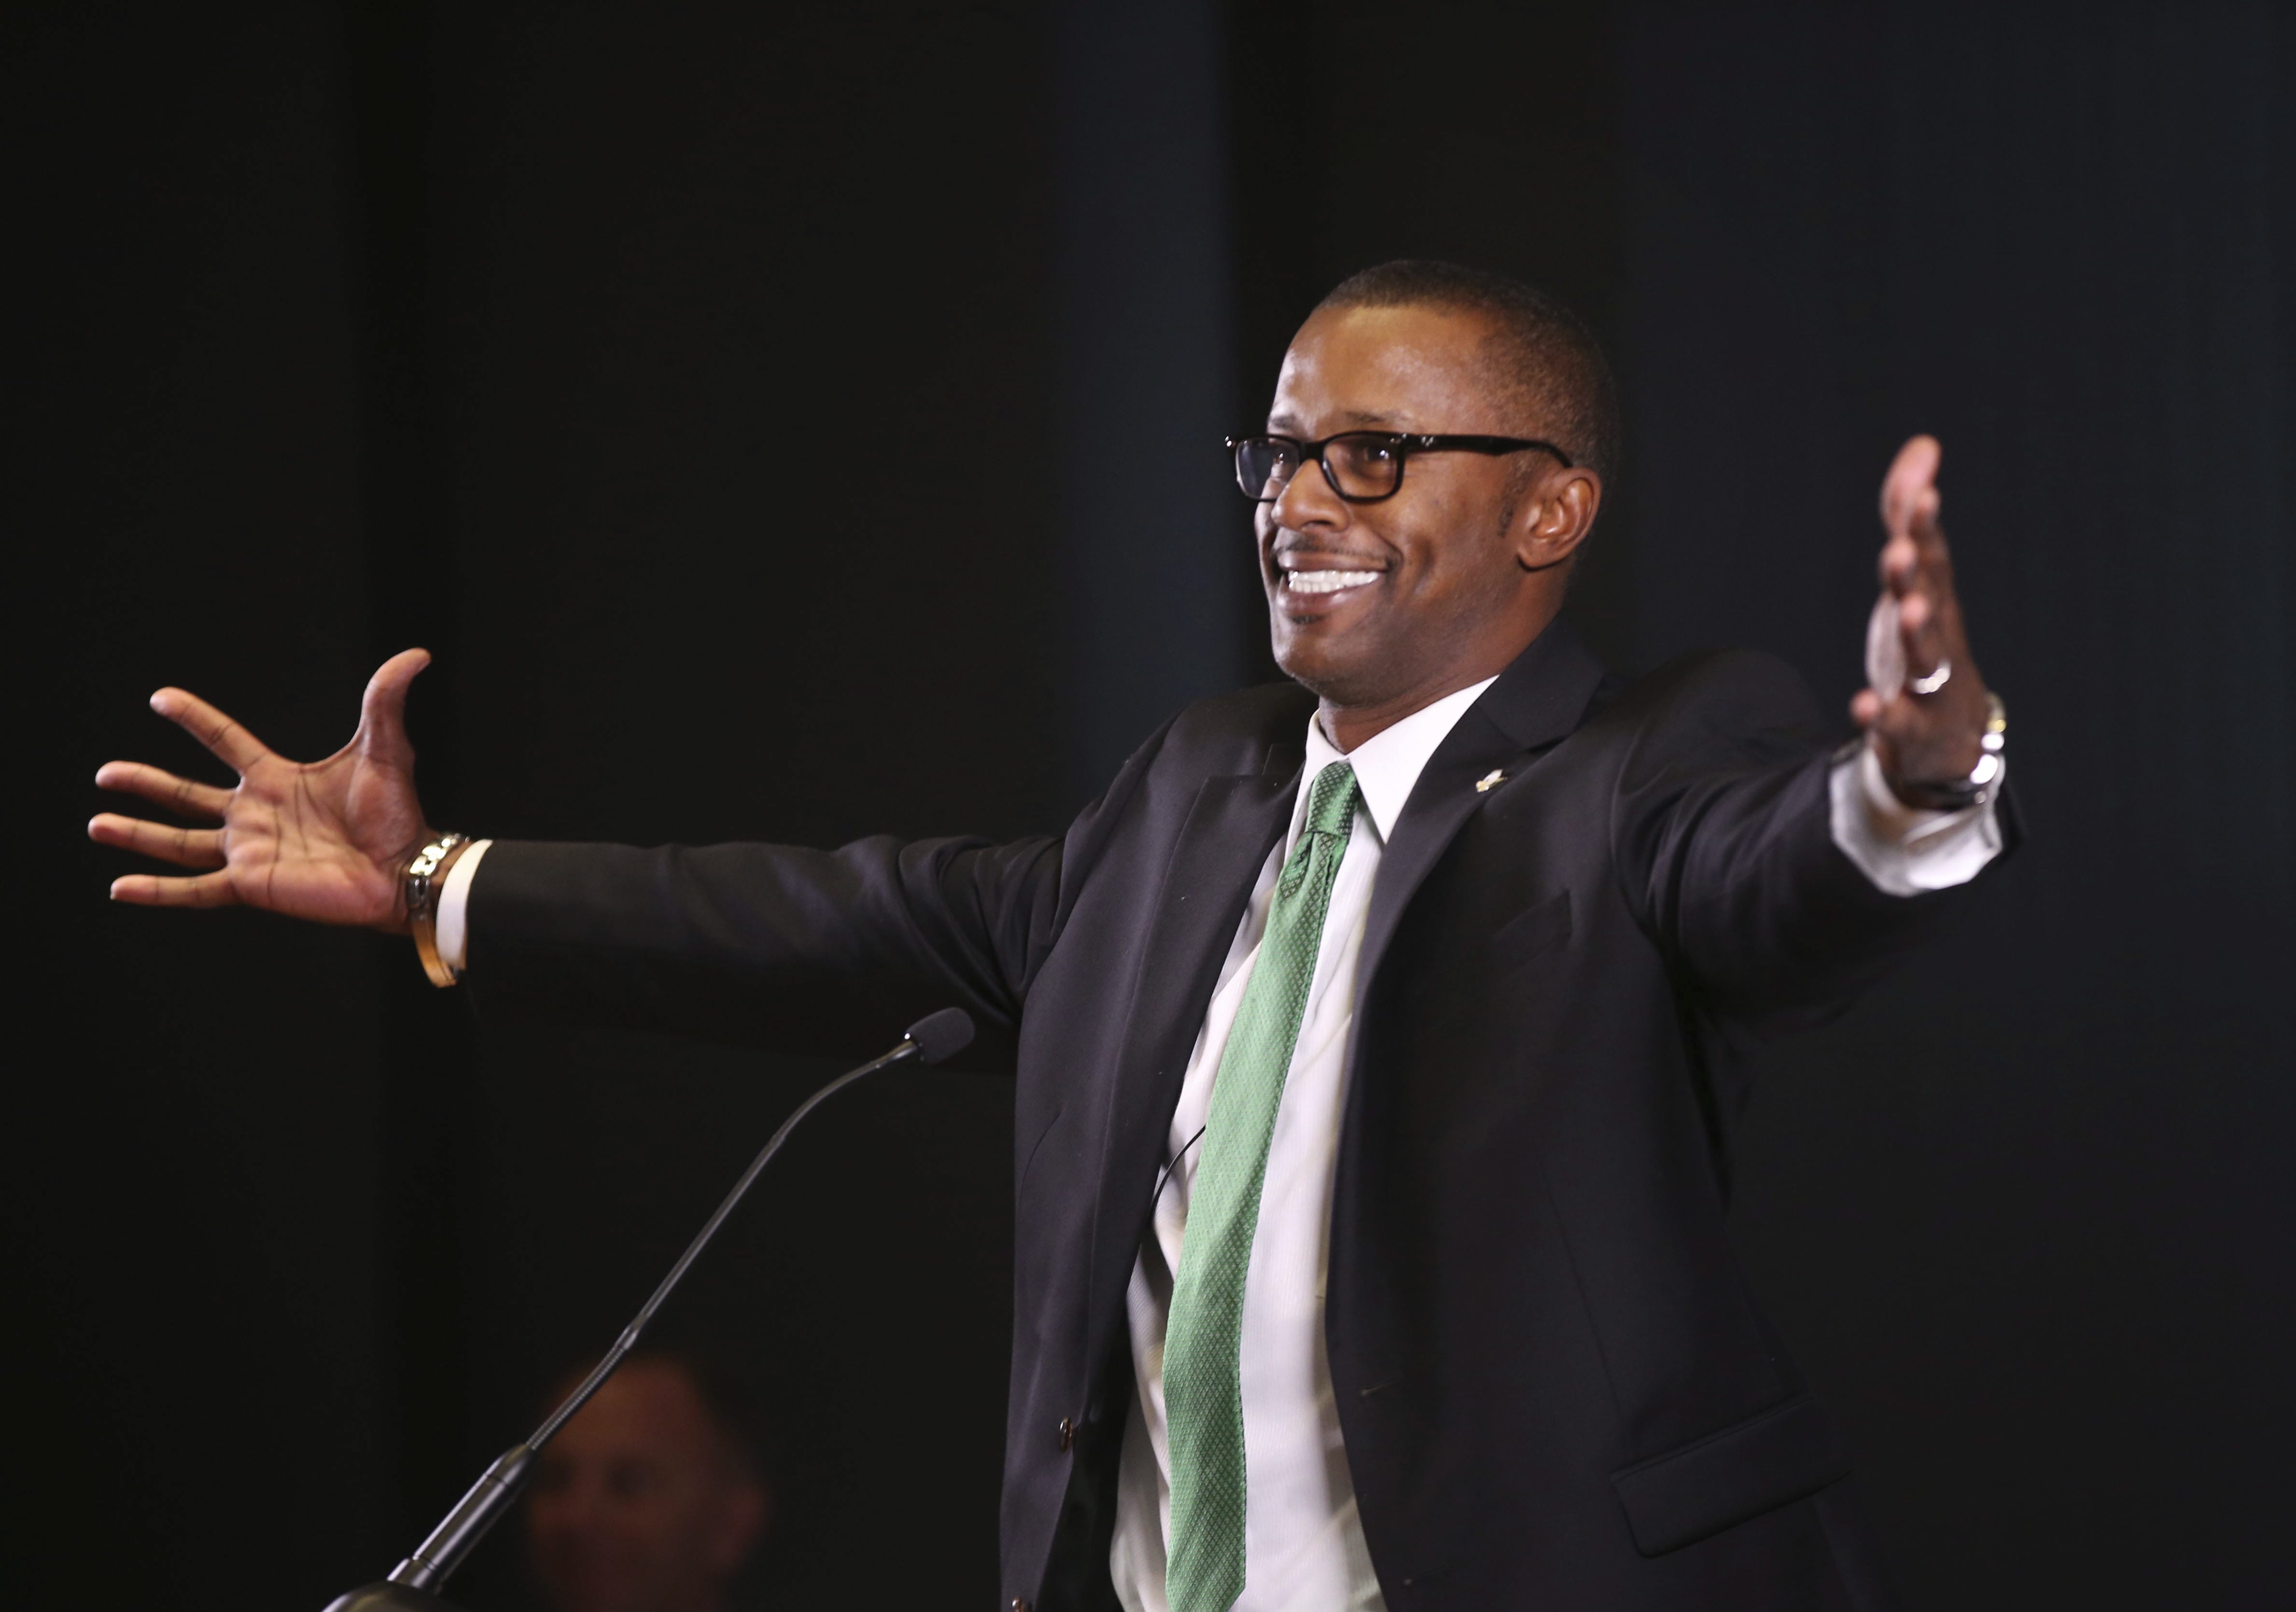 New University of Oregon NCAA college football coach Willie Taggart jokes with the audience during an introductory press conference in Eugene, Ore., Thursday Dec. 8, 2016.